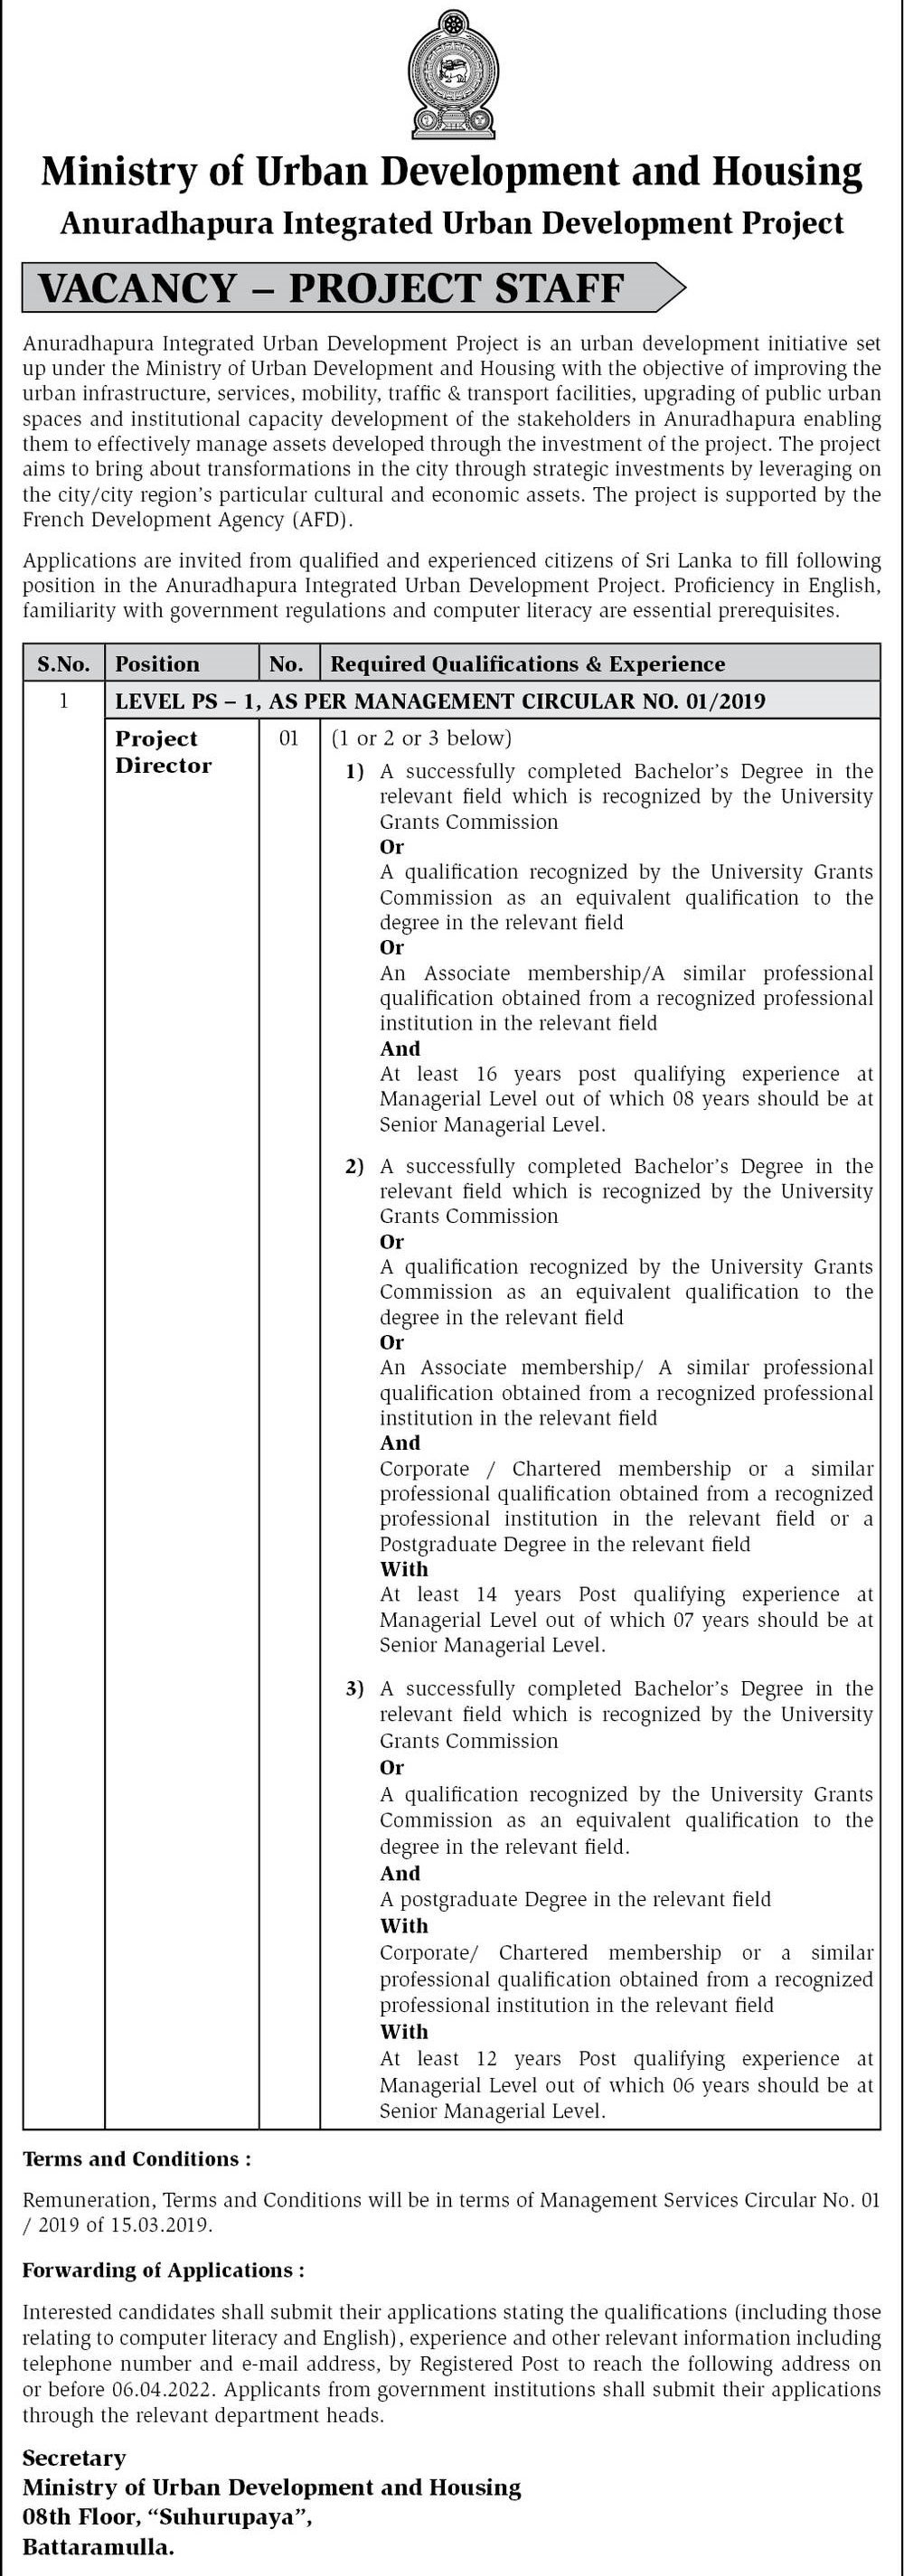 Jobs Vacancies in Ministry of Urban Development and Housing